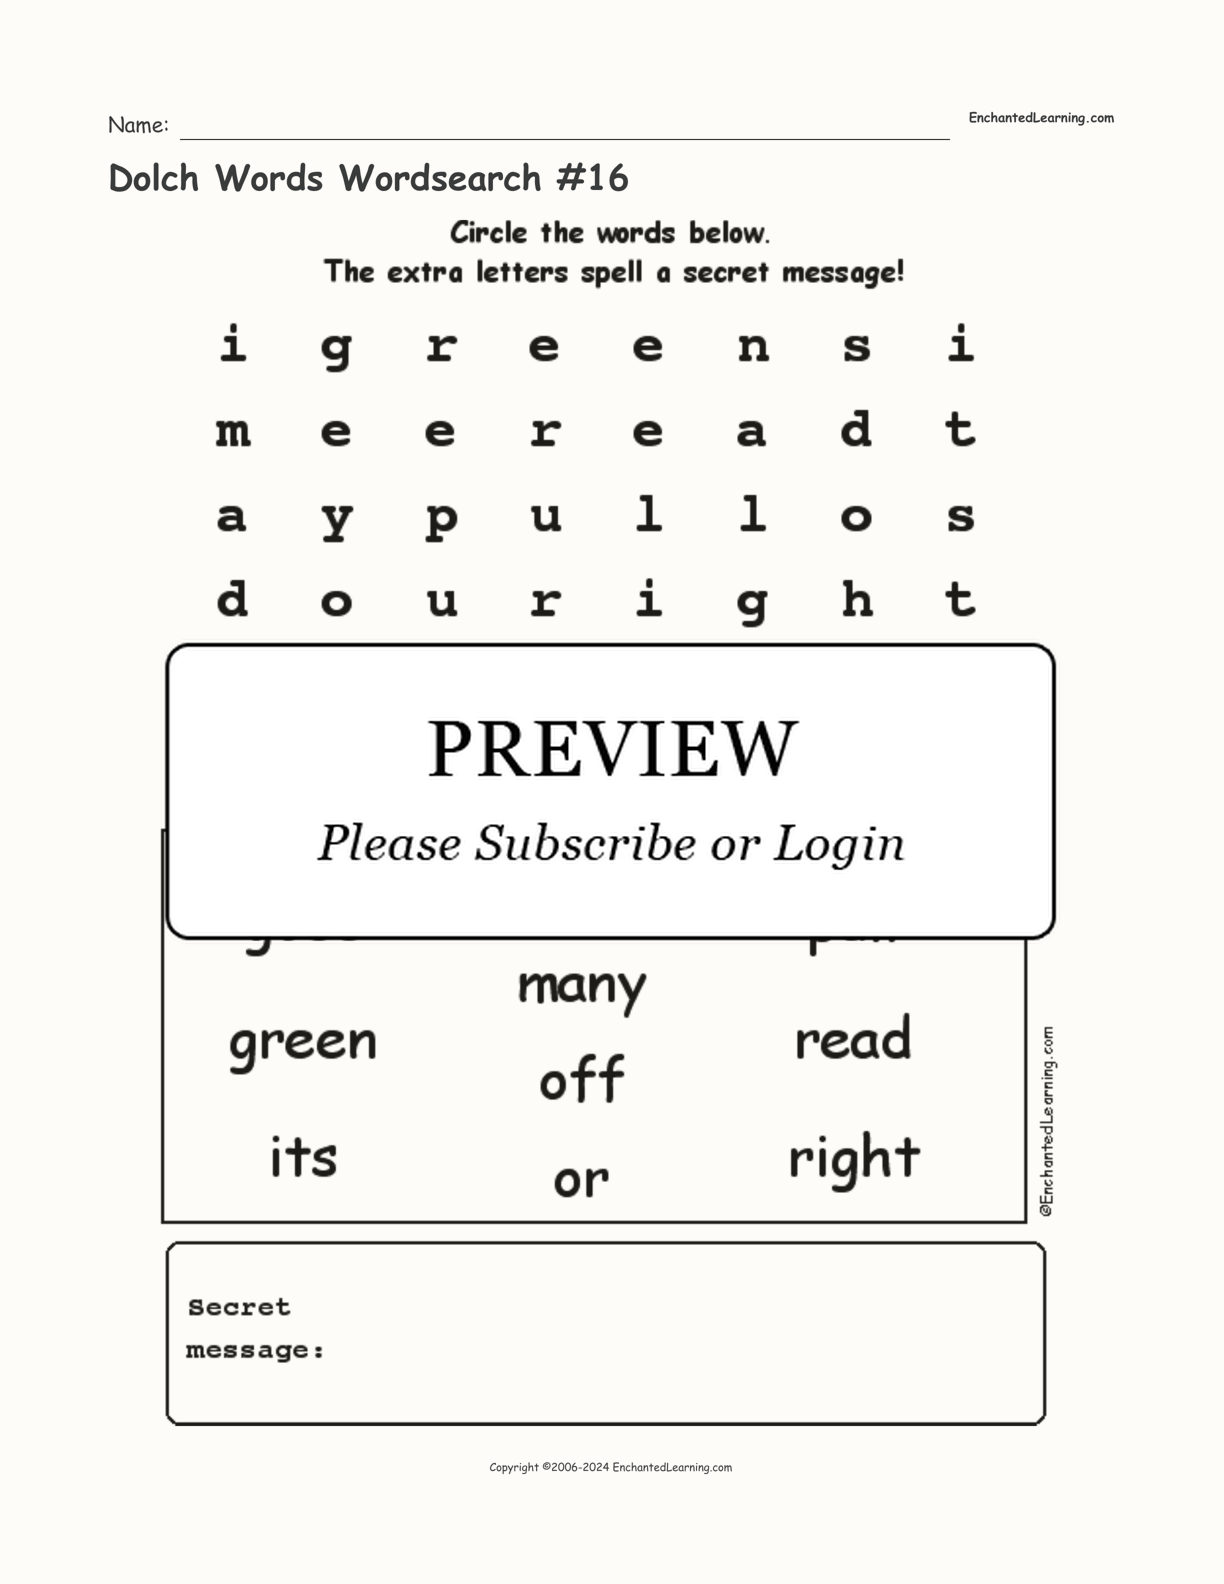 Dolch Words Wordsearch #16 interactive worksheet page 1